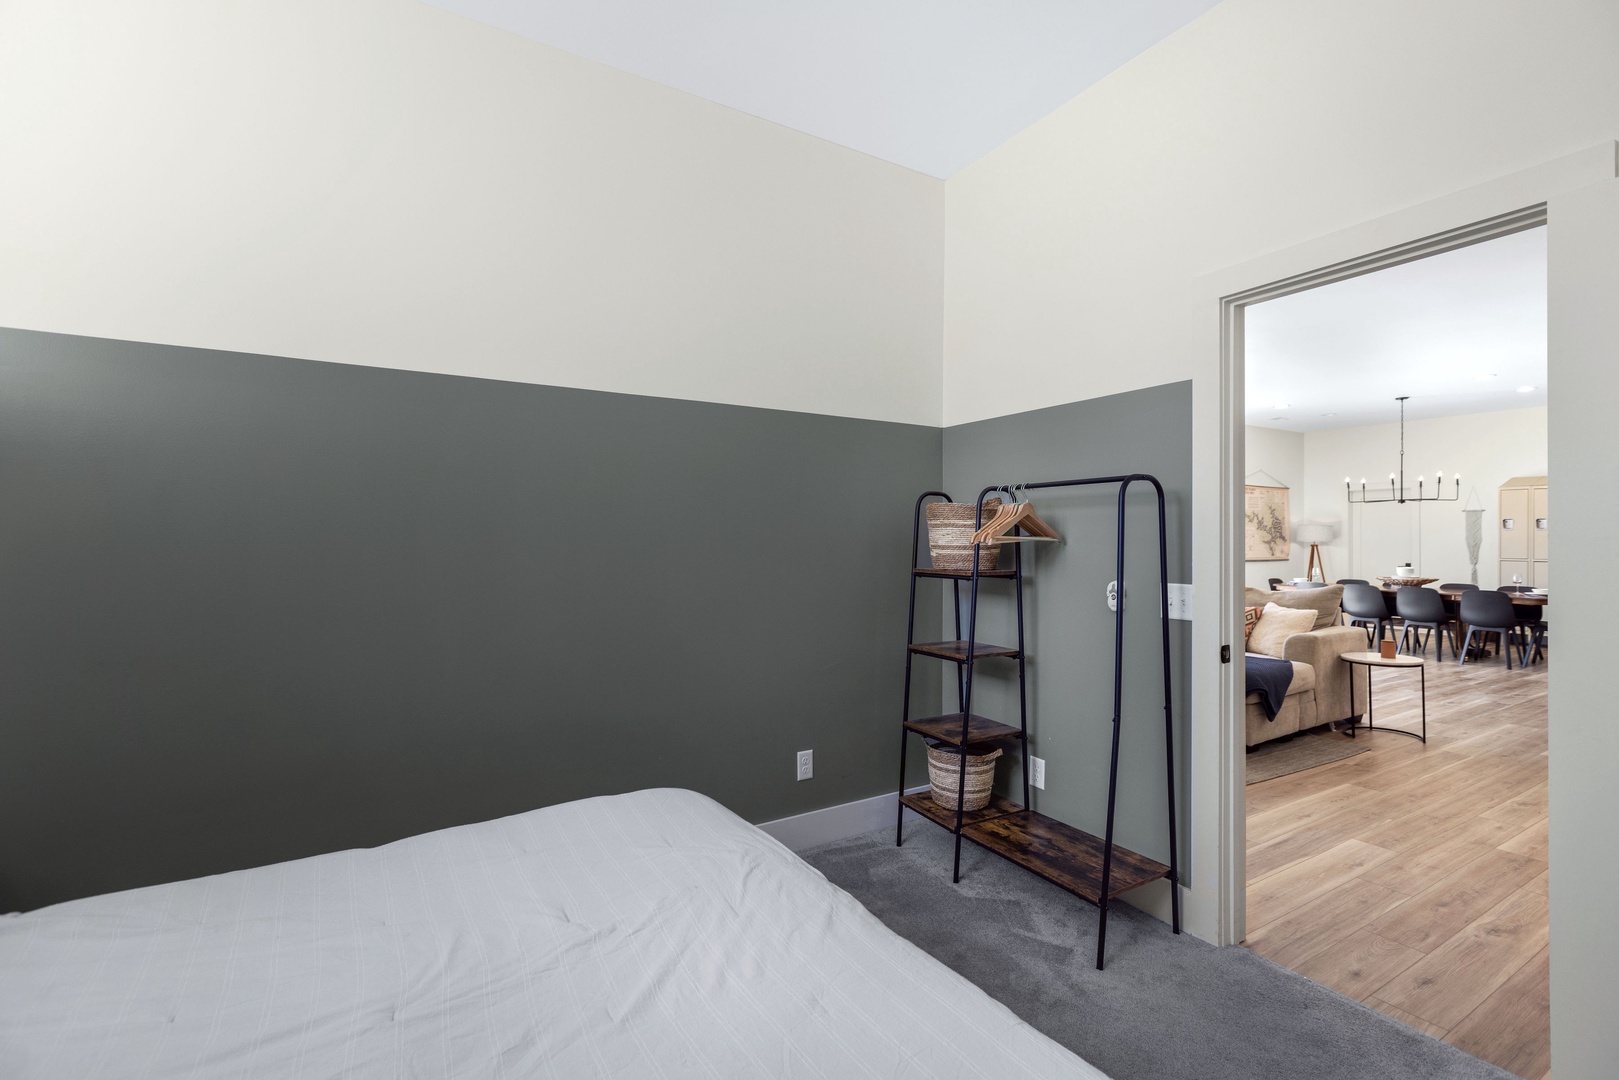 The third bedroom retreat offers a comfortable king sized bed